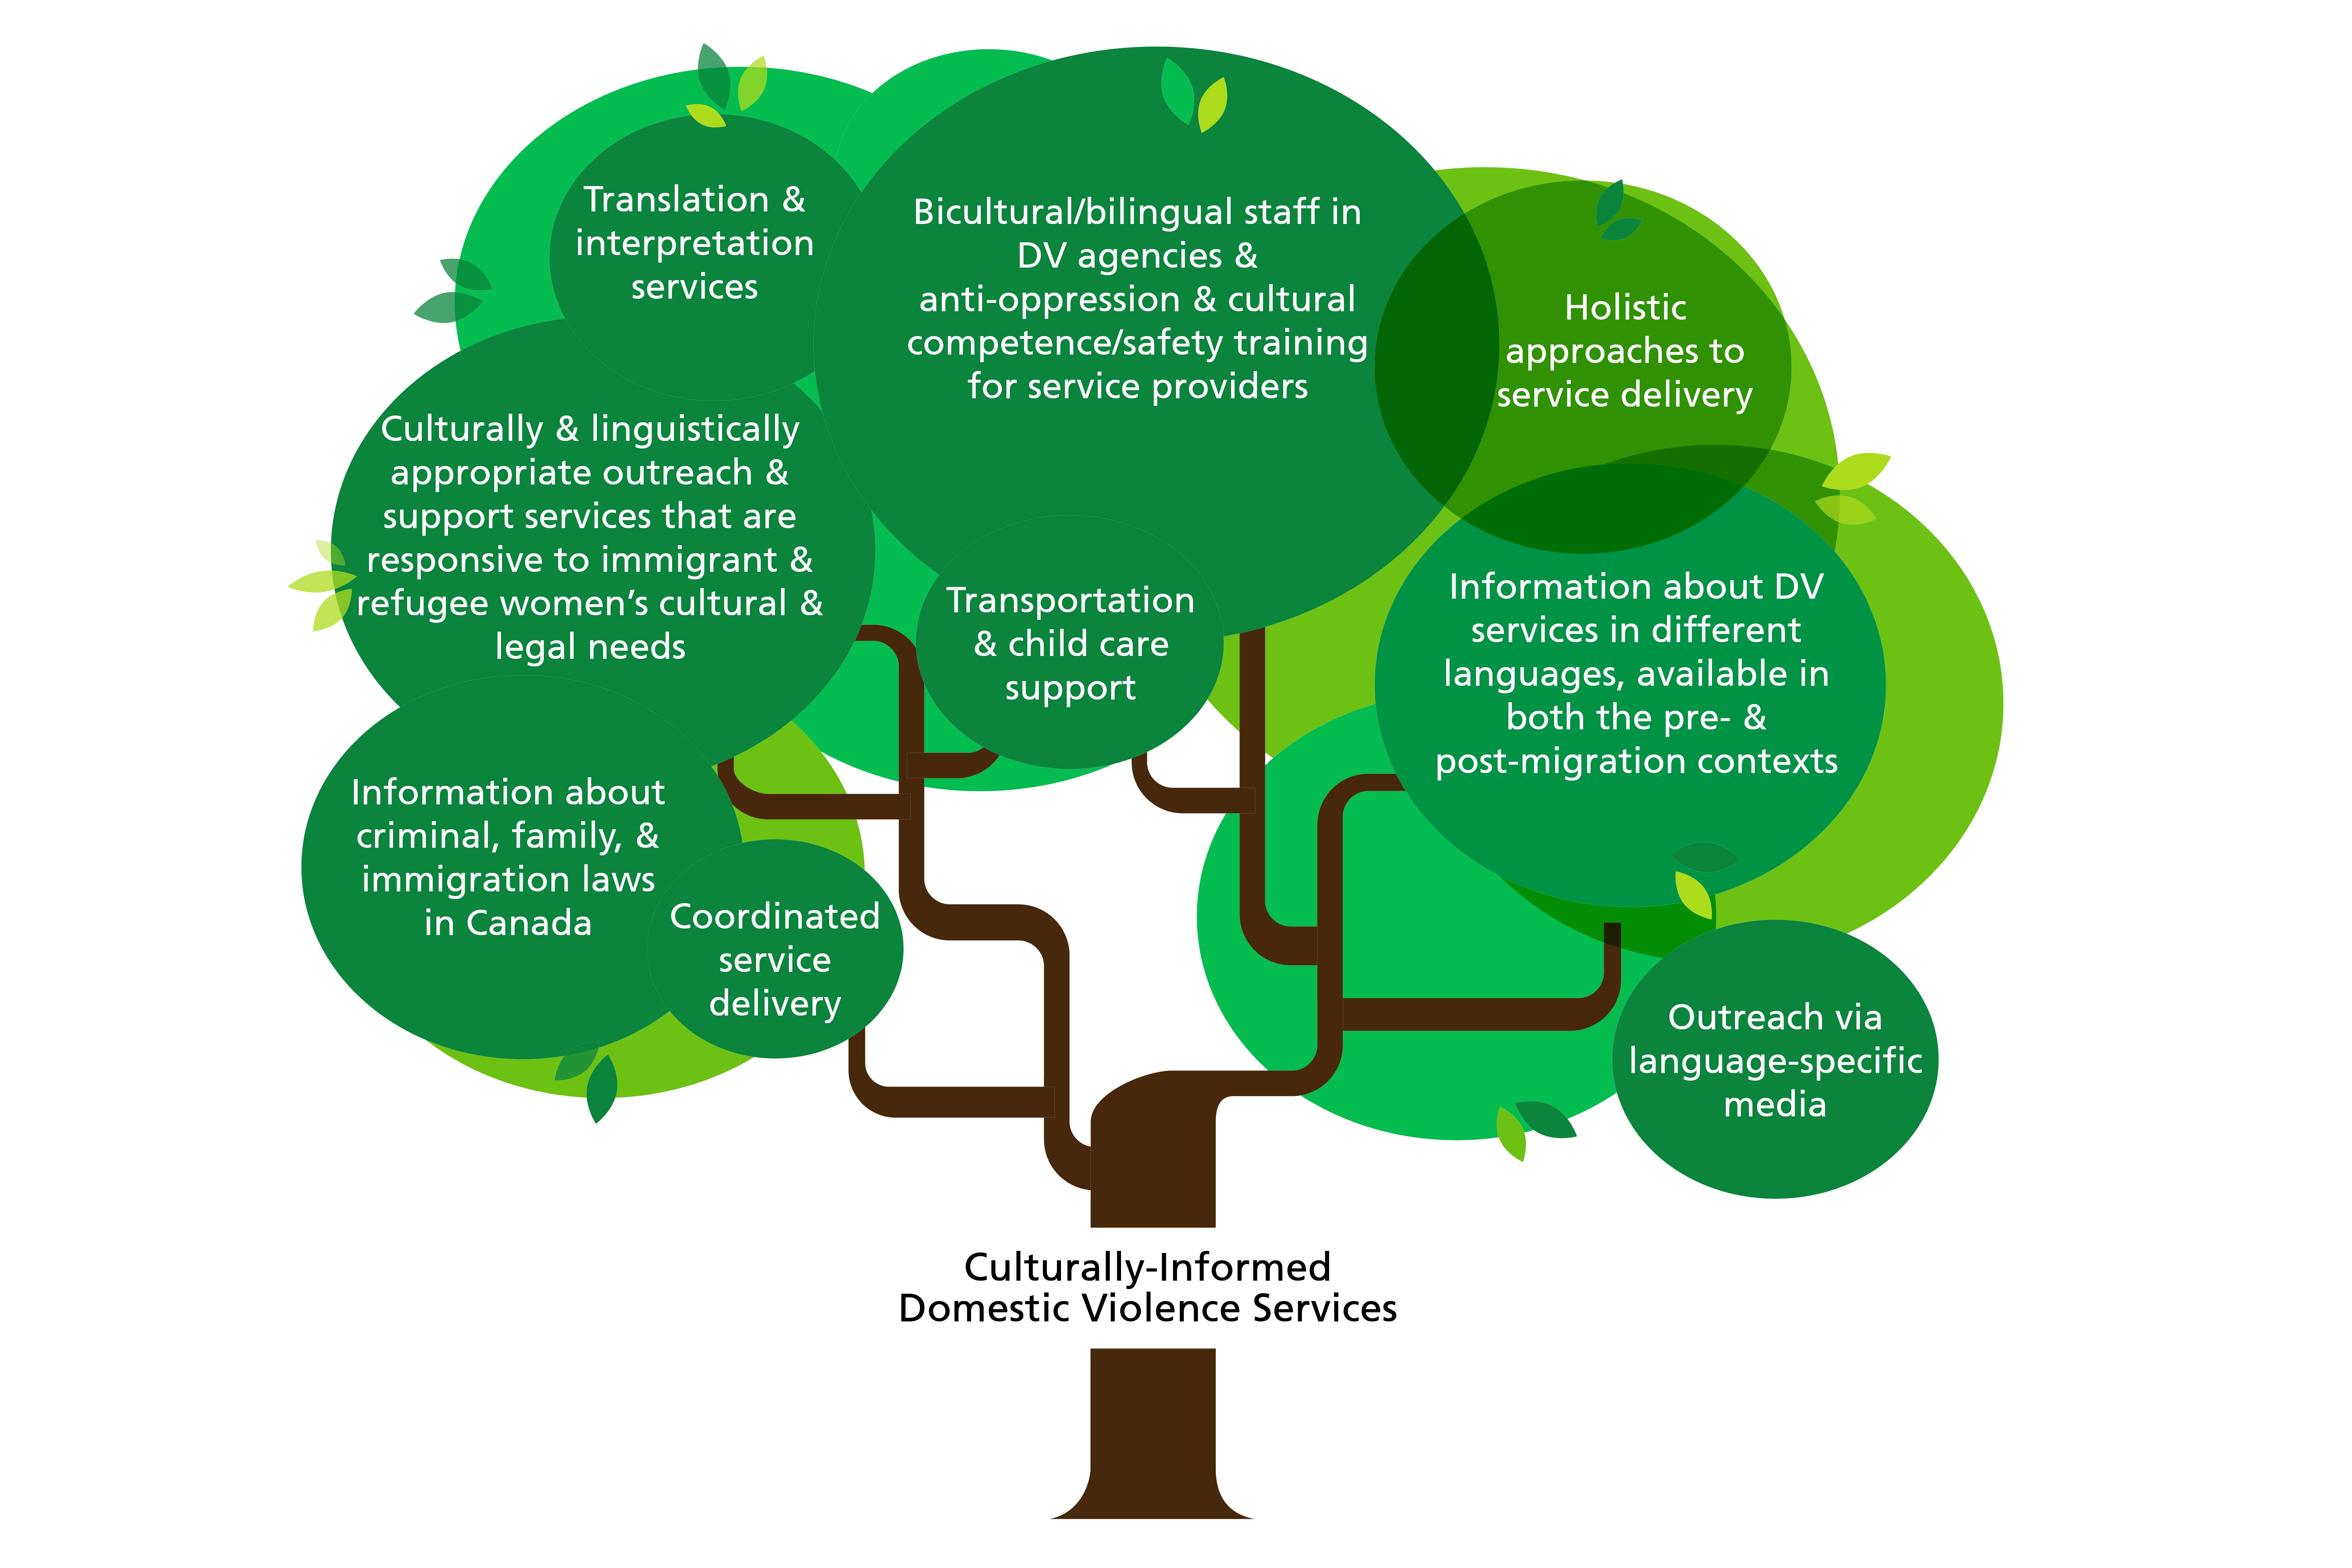 Tree graphic - culturally informed domestic violence services - examples of services listed in branches of tree